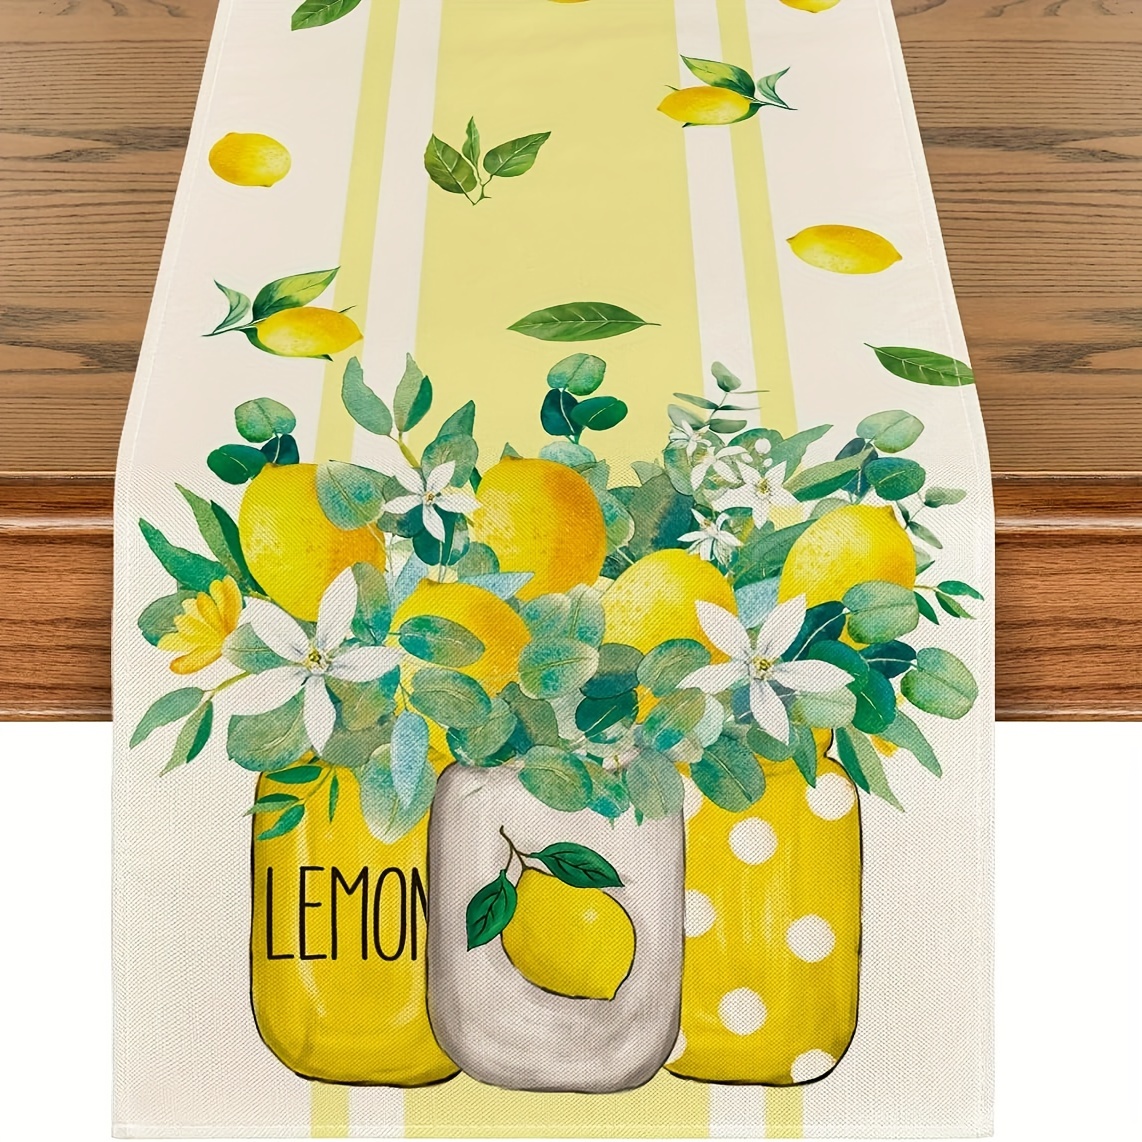 

1pc, Polyester Table Runner (13x72 Inches/33x183cm), Lemon Floral Design, Spring Summer Party Decor, Kitchen Dining Holiday Tablecloth, Festive Home Decor